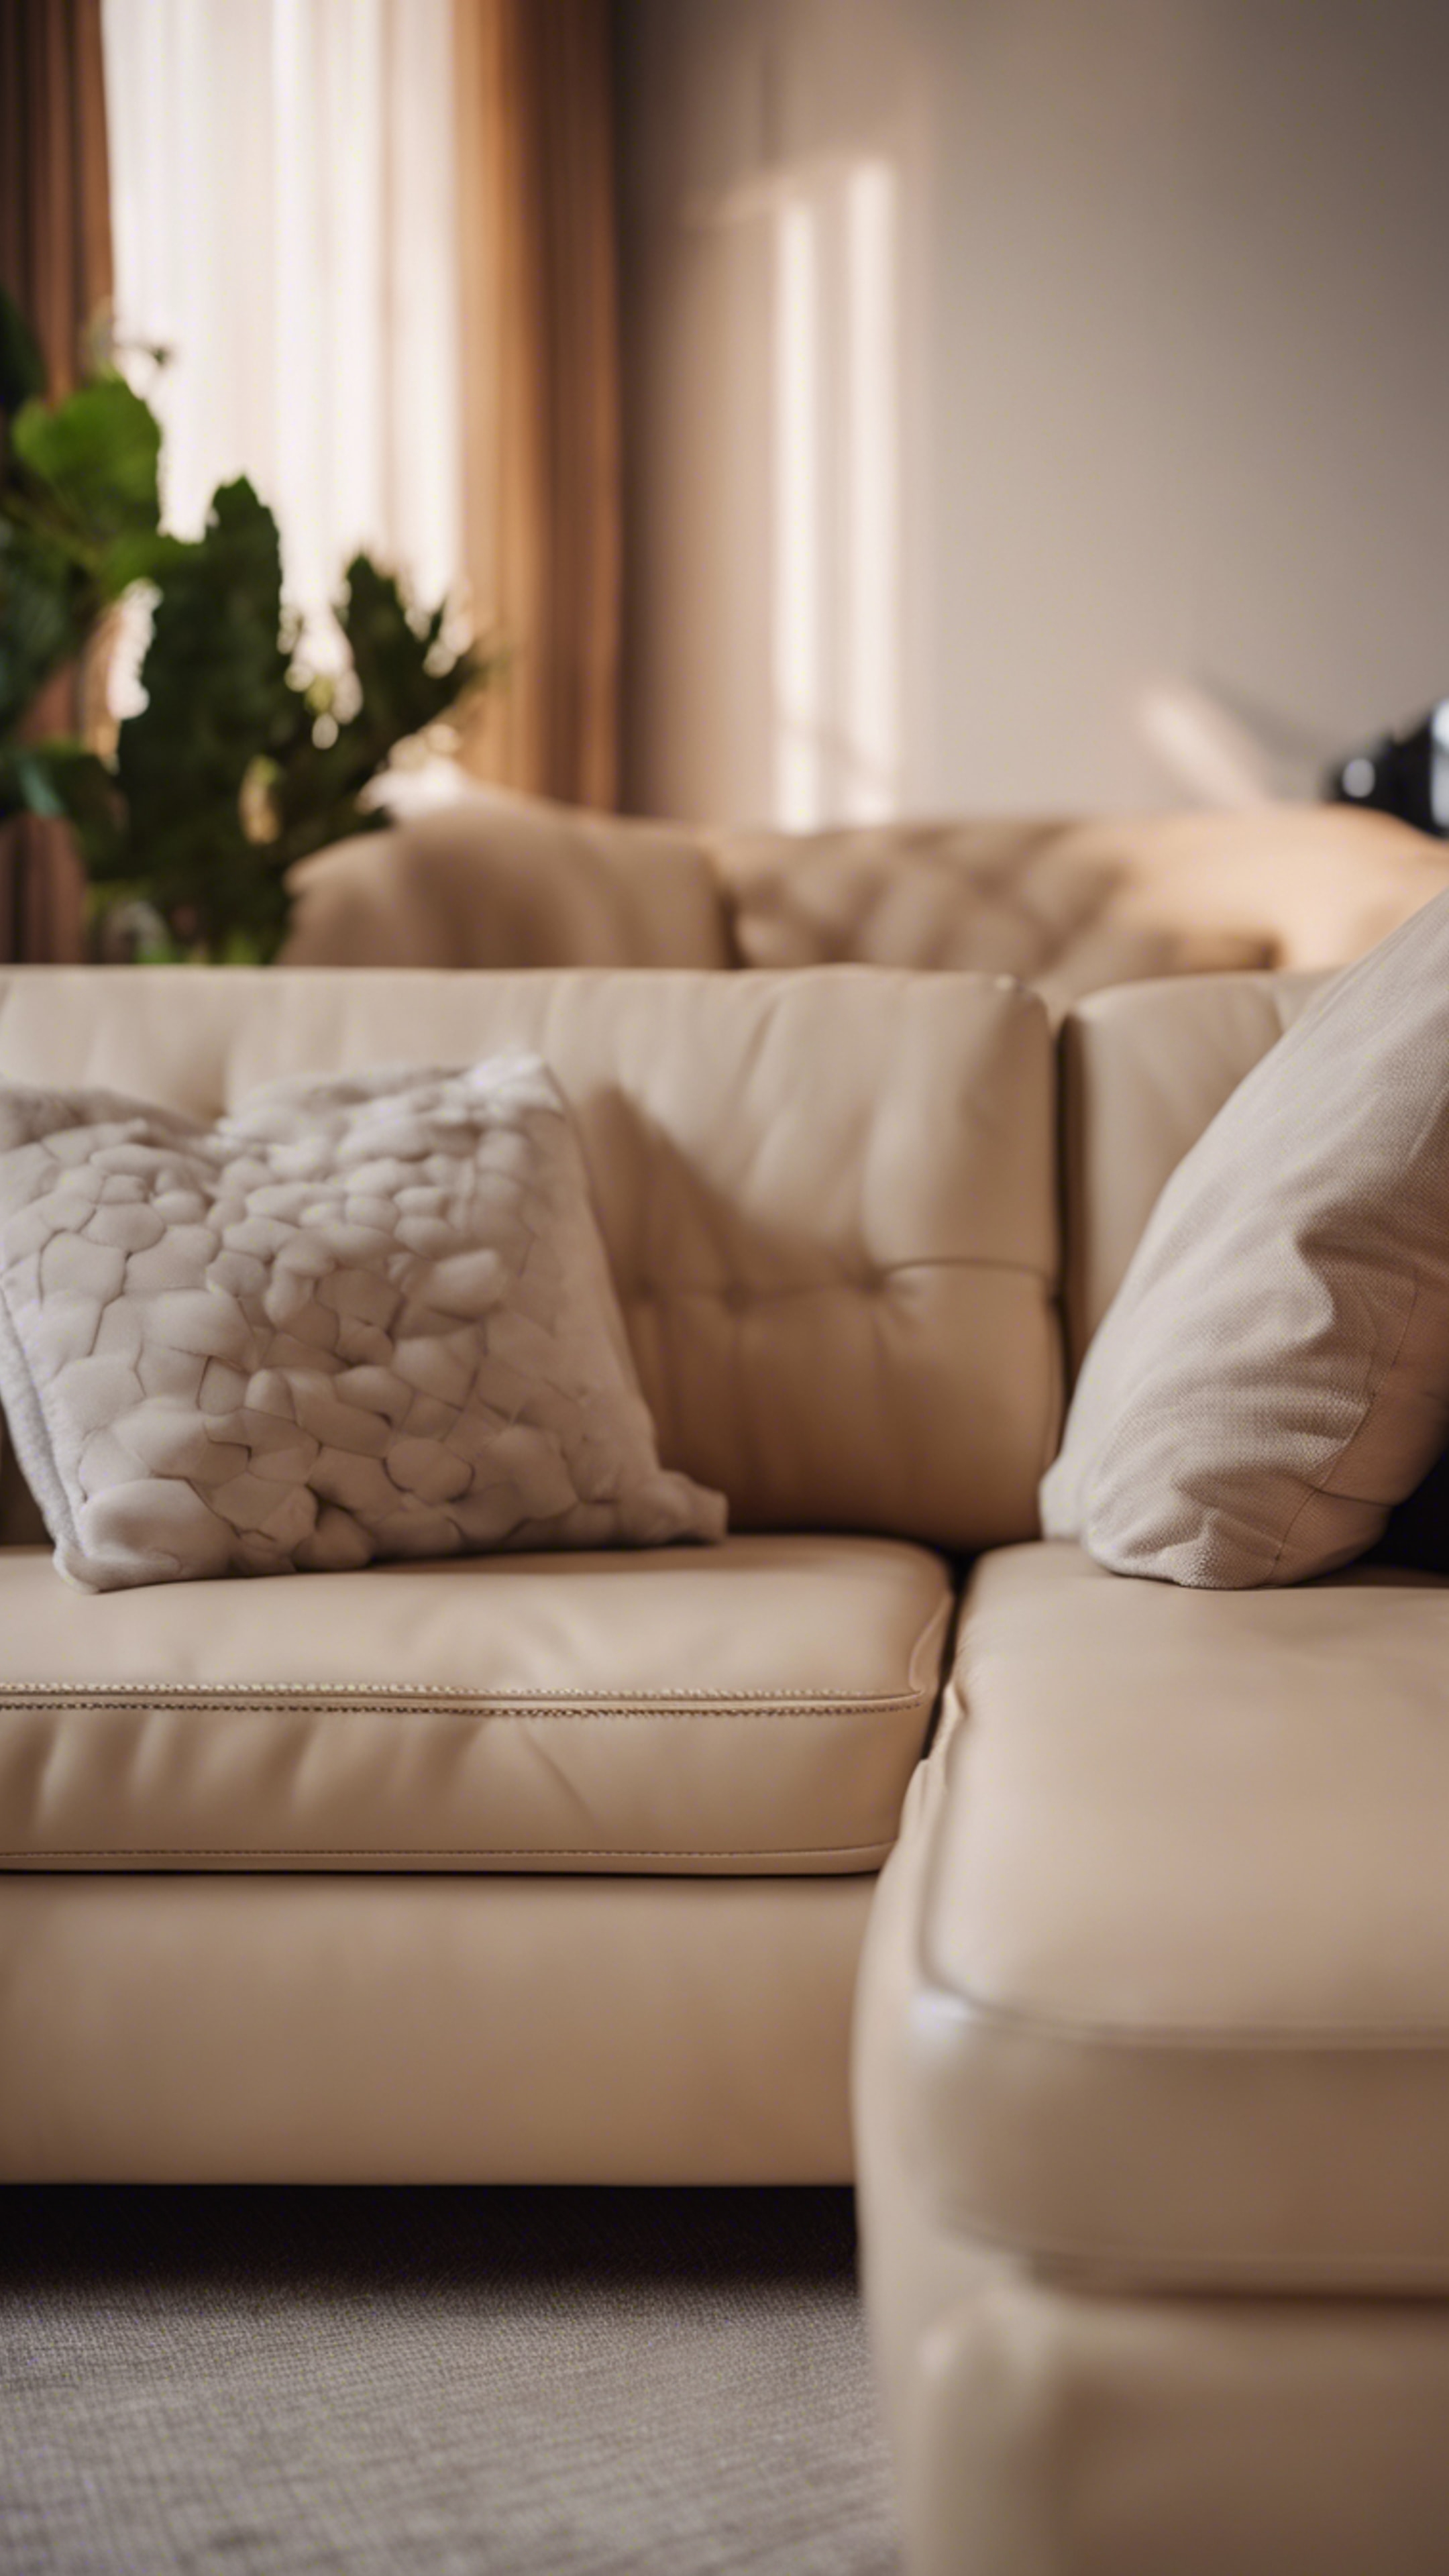 A new, beige leather sofa sitting cozily in a minimalist living room with warm lighting.壁紙[50f9d766dce04faf8d3f]